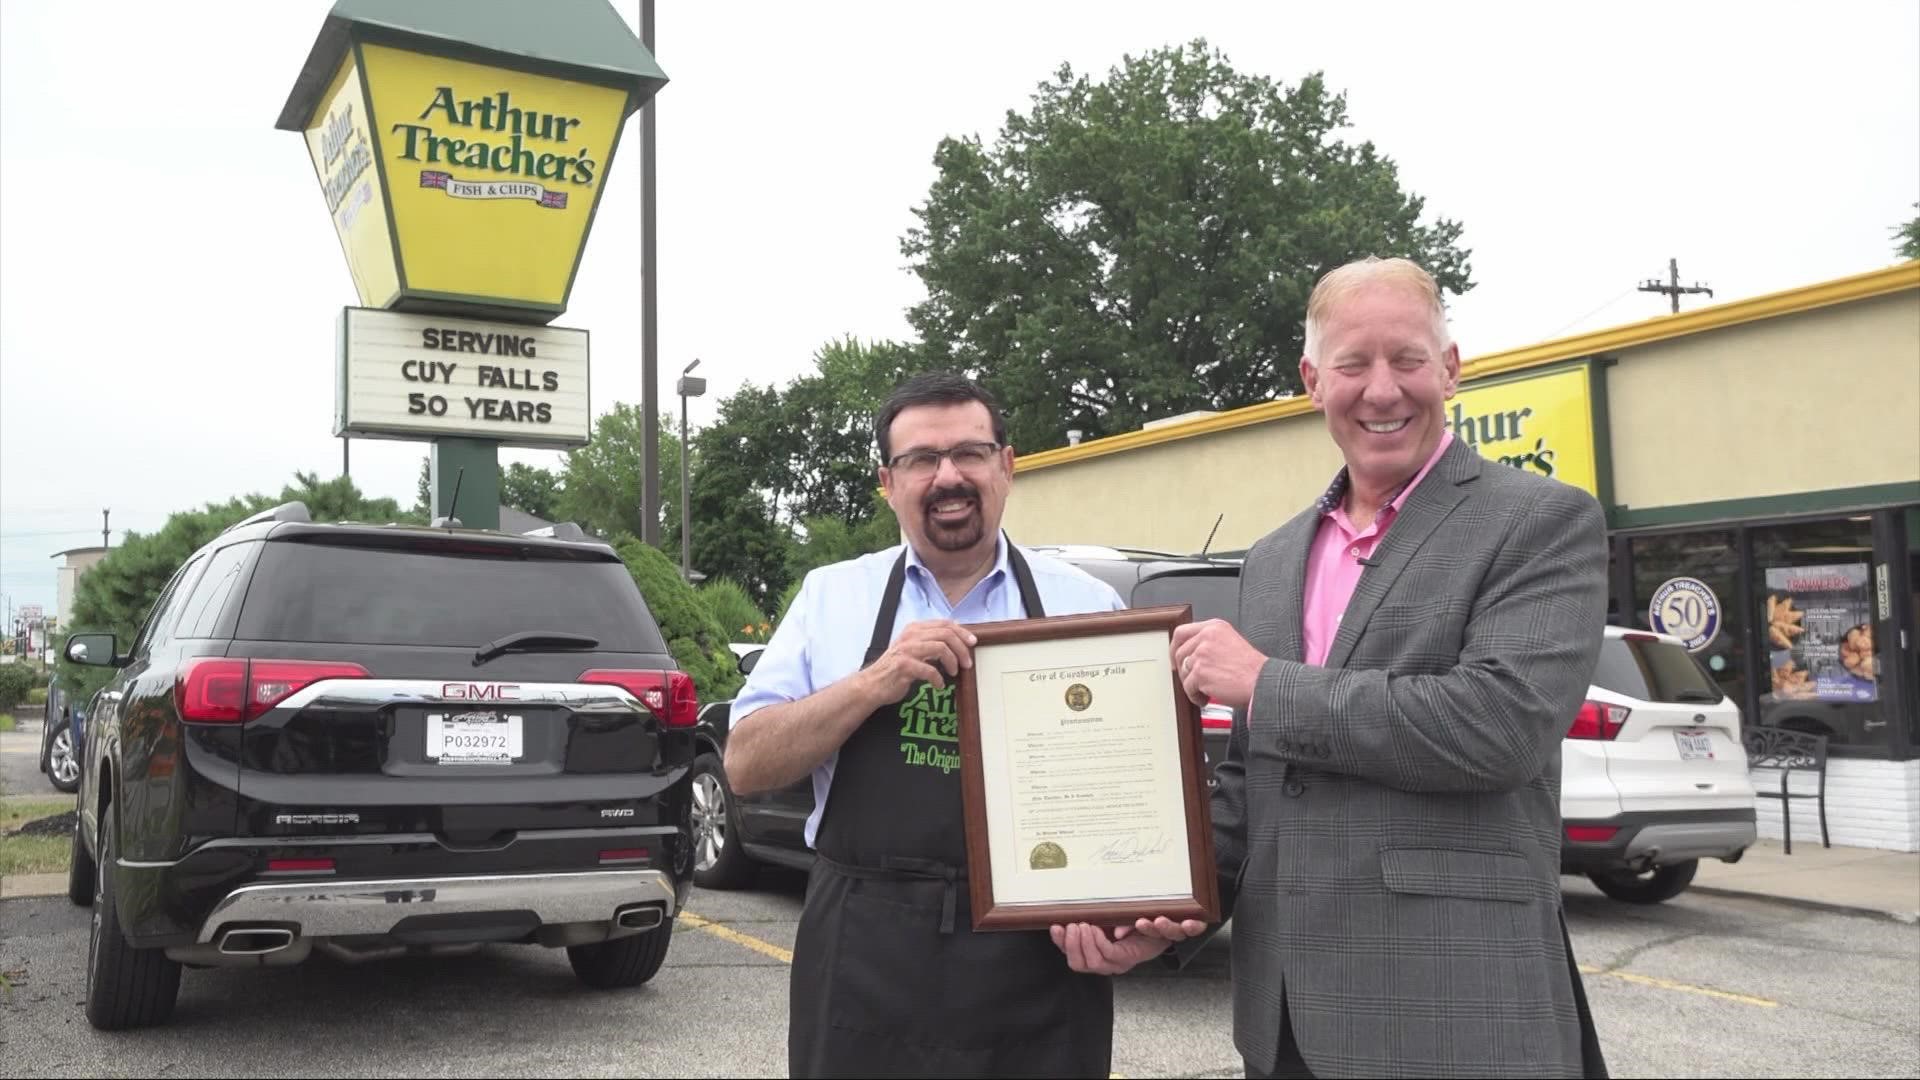 Mike Polk Jr. recently ventured to Cuyahoga Falls to find out why the last Arthur Treacher's restaurant is drawing diners far and wide.